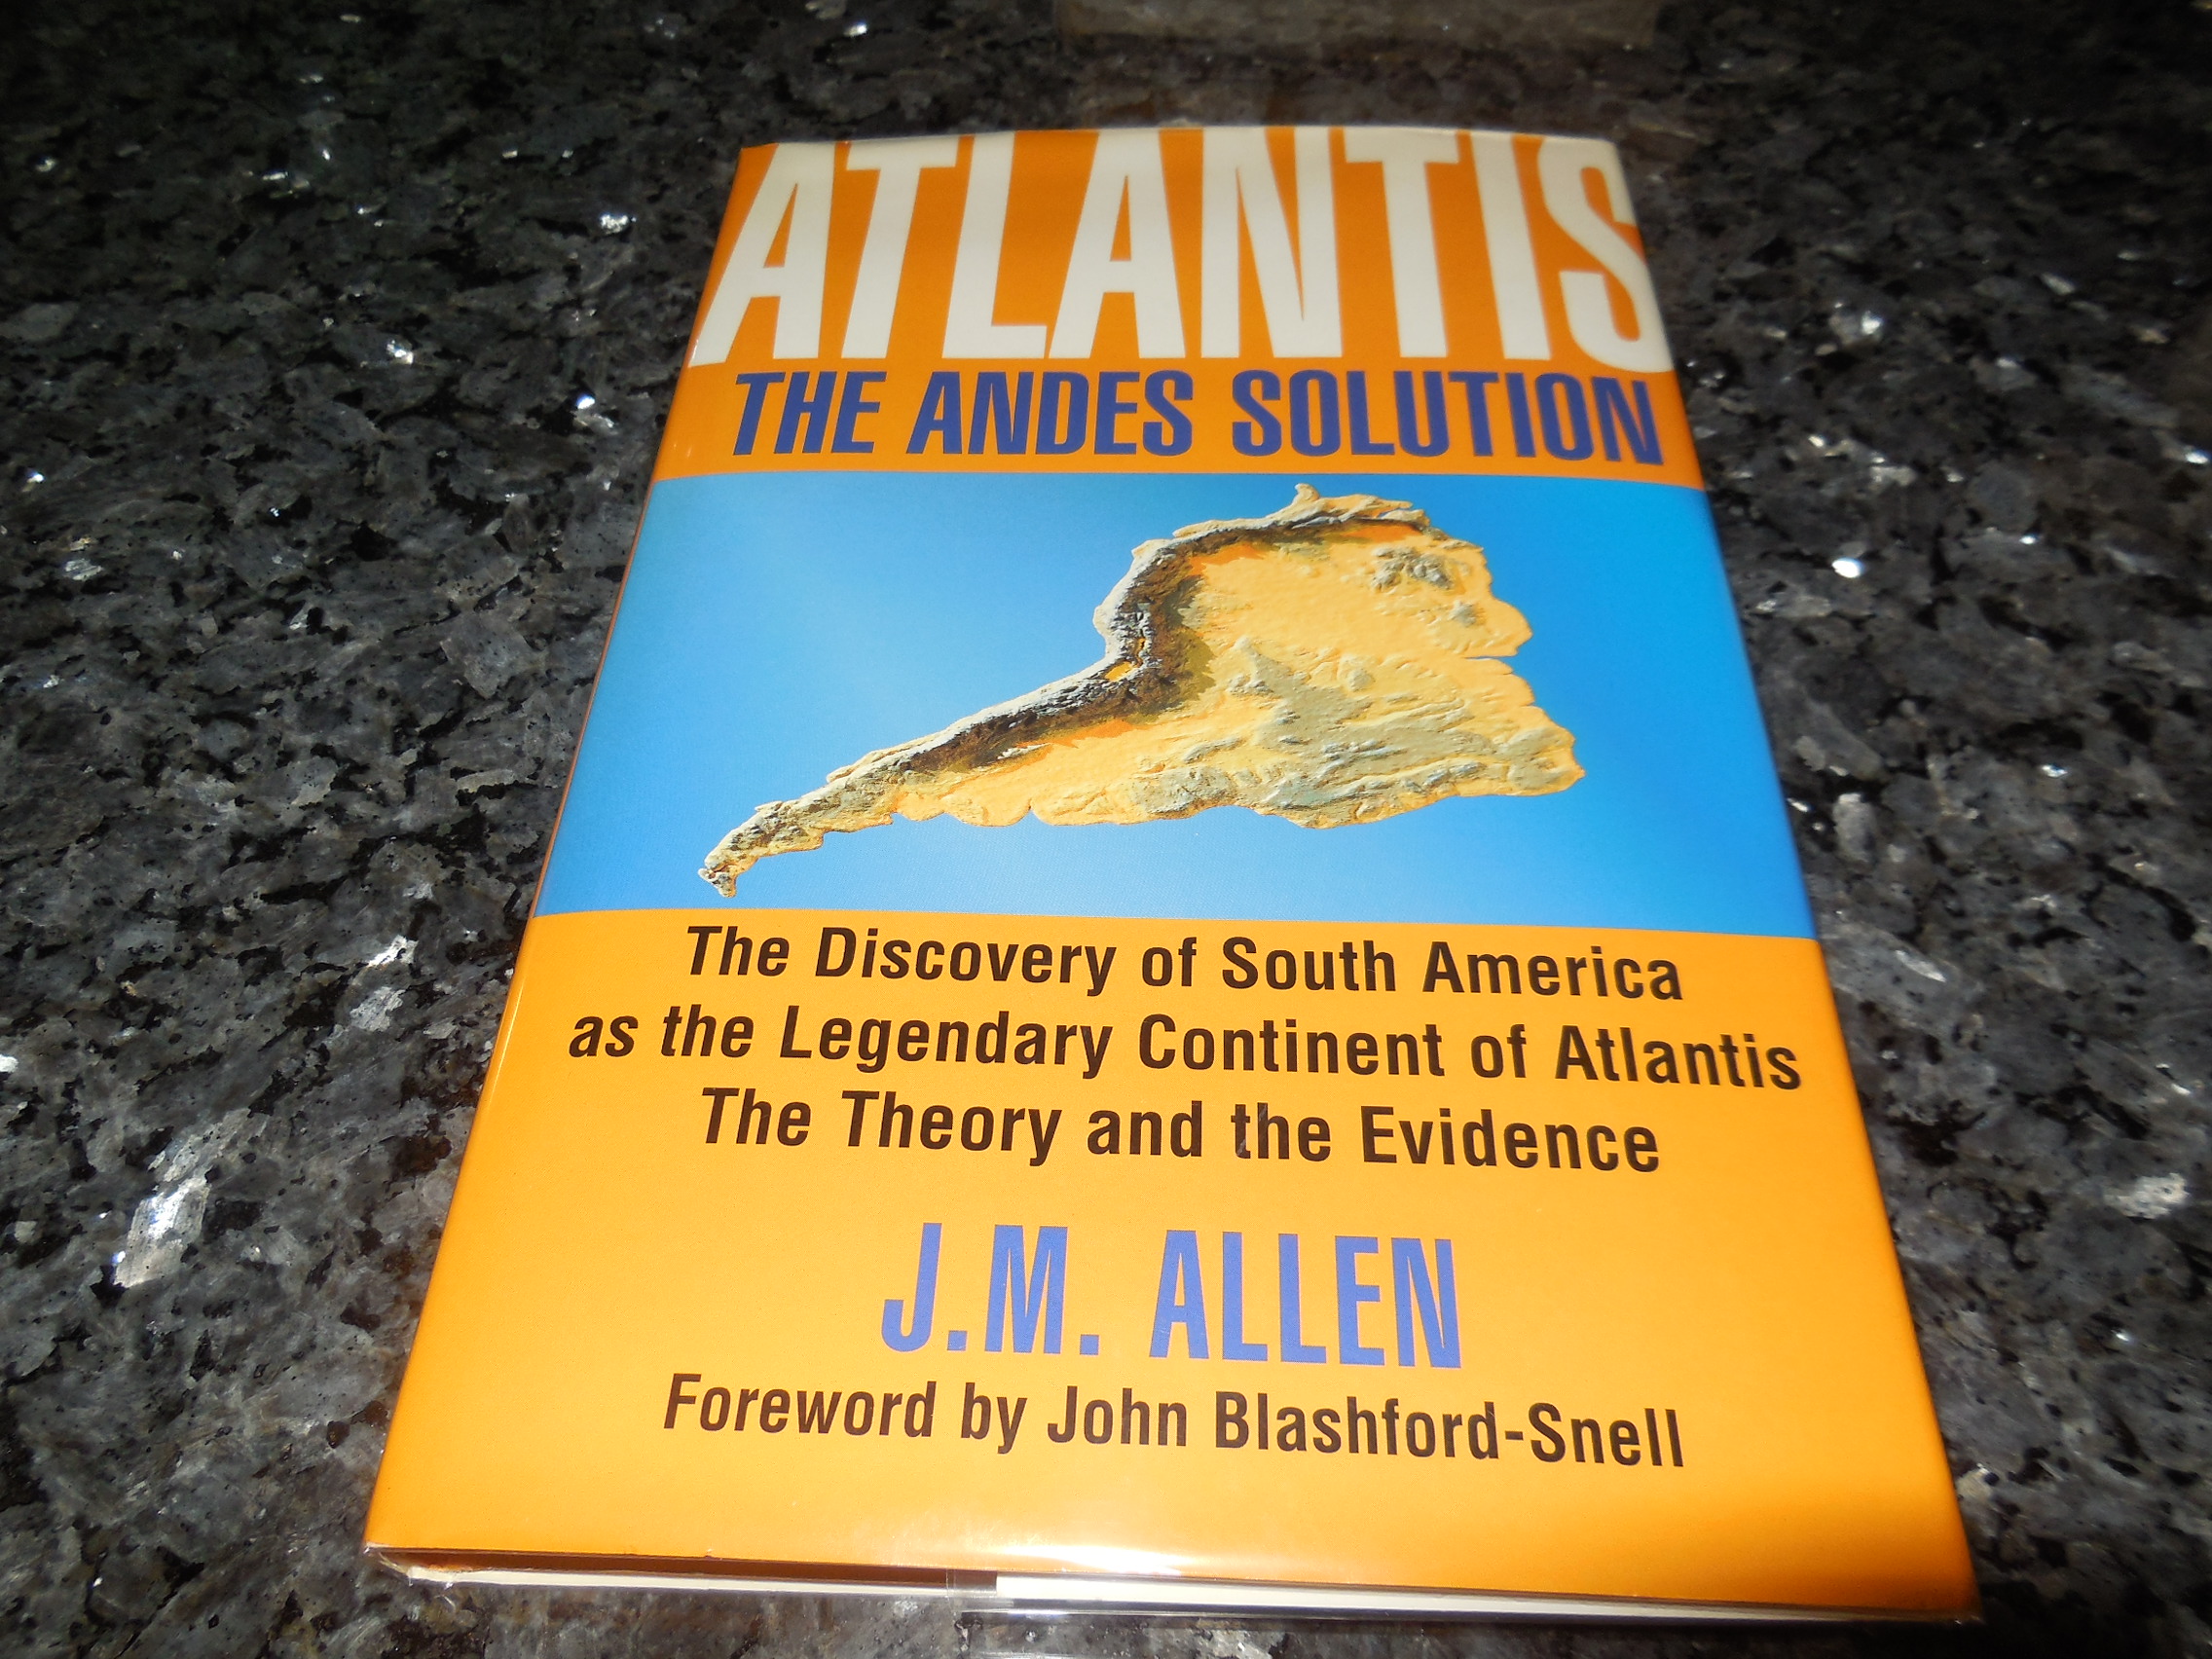 Atlantis: The Andes Solution - The Discovery of South America as the  Legendary Continent of Atlantis, the Theory and Evidence